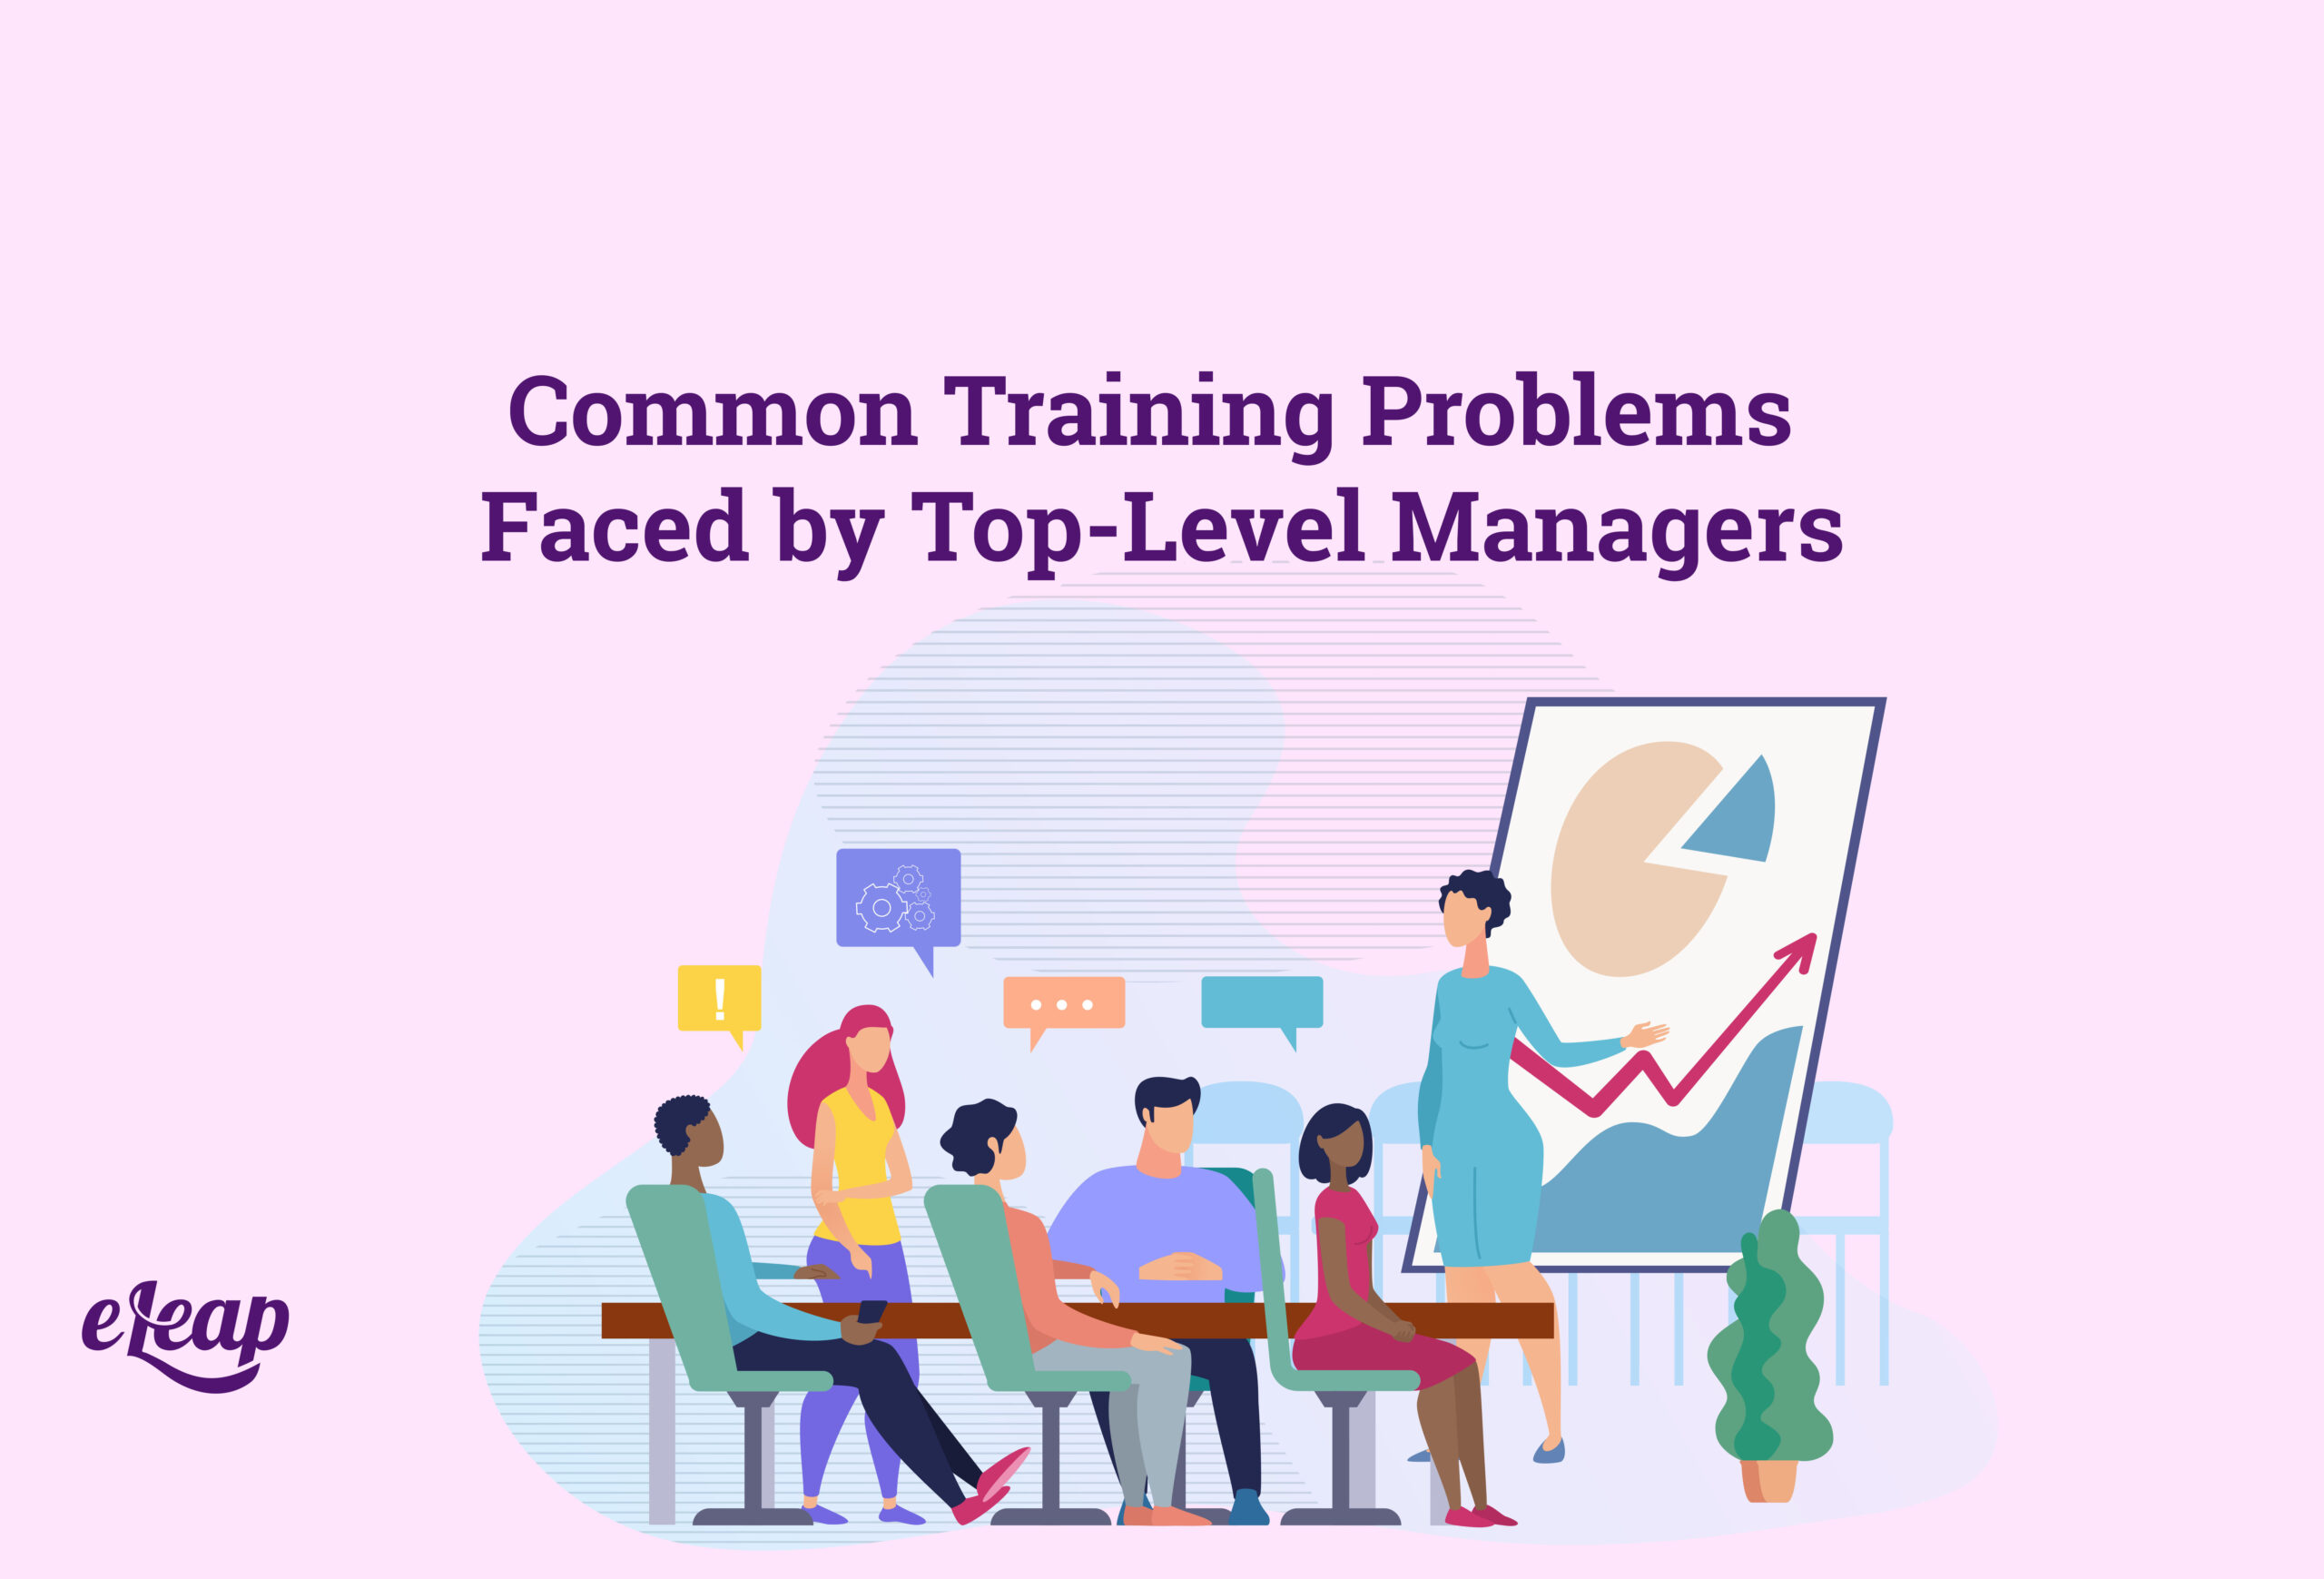 Common Training Problems Faced by Top-Level Managers